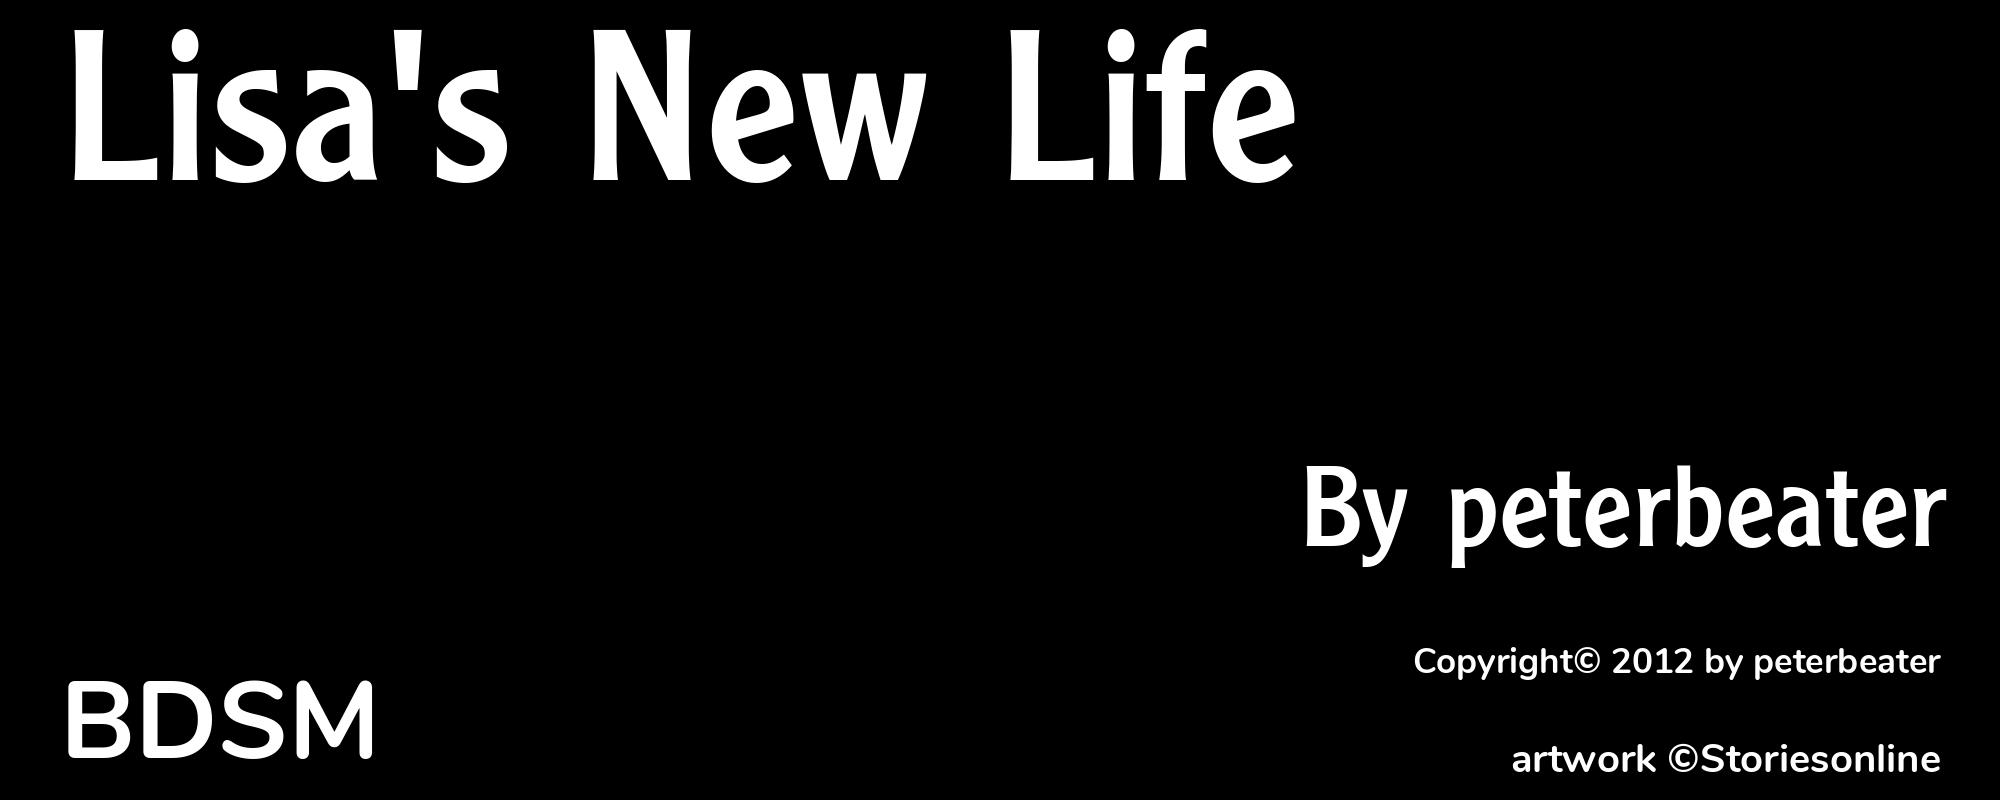 Lisa's New Life - Cover